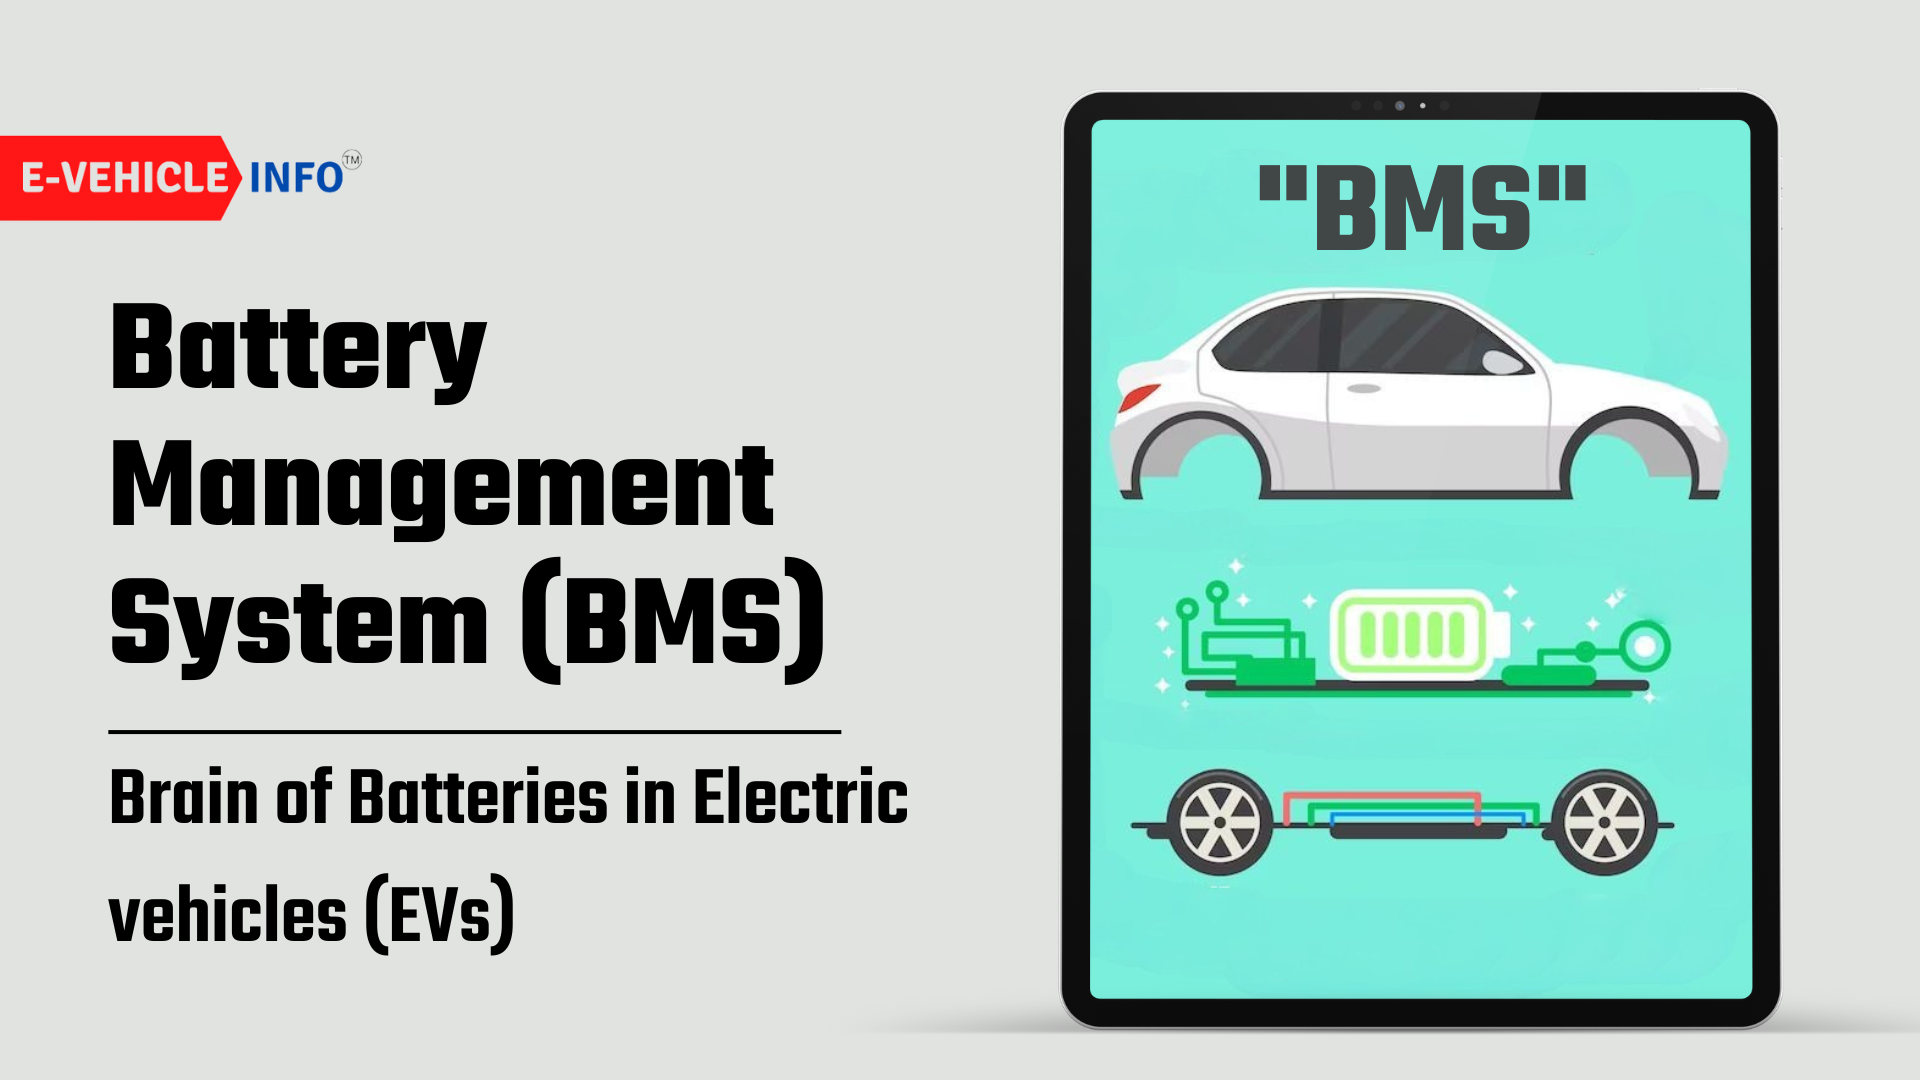 https://e-vehicleinfo.com/battery-management-system-brain-of-batteries-in-electric-vehicles/